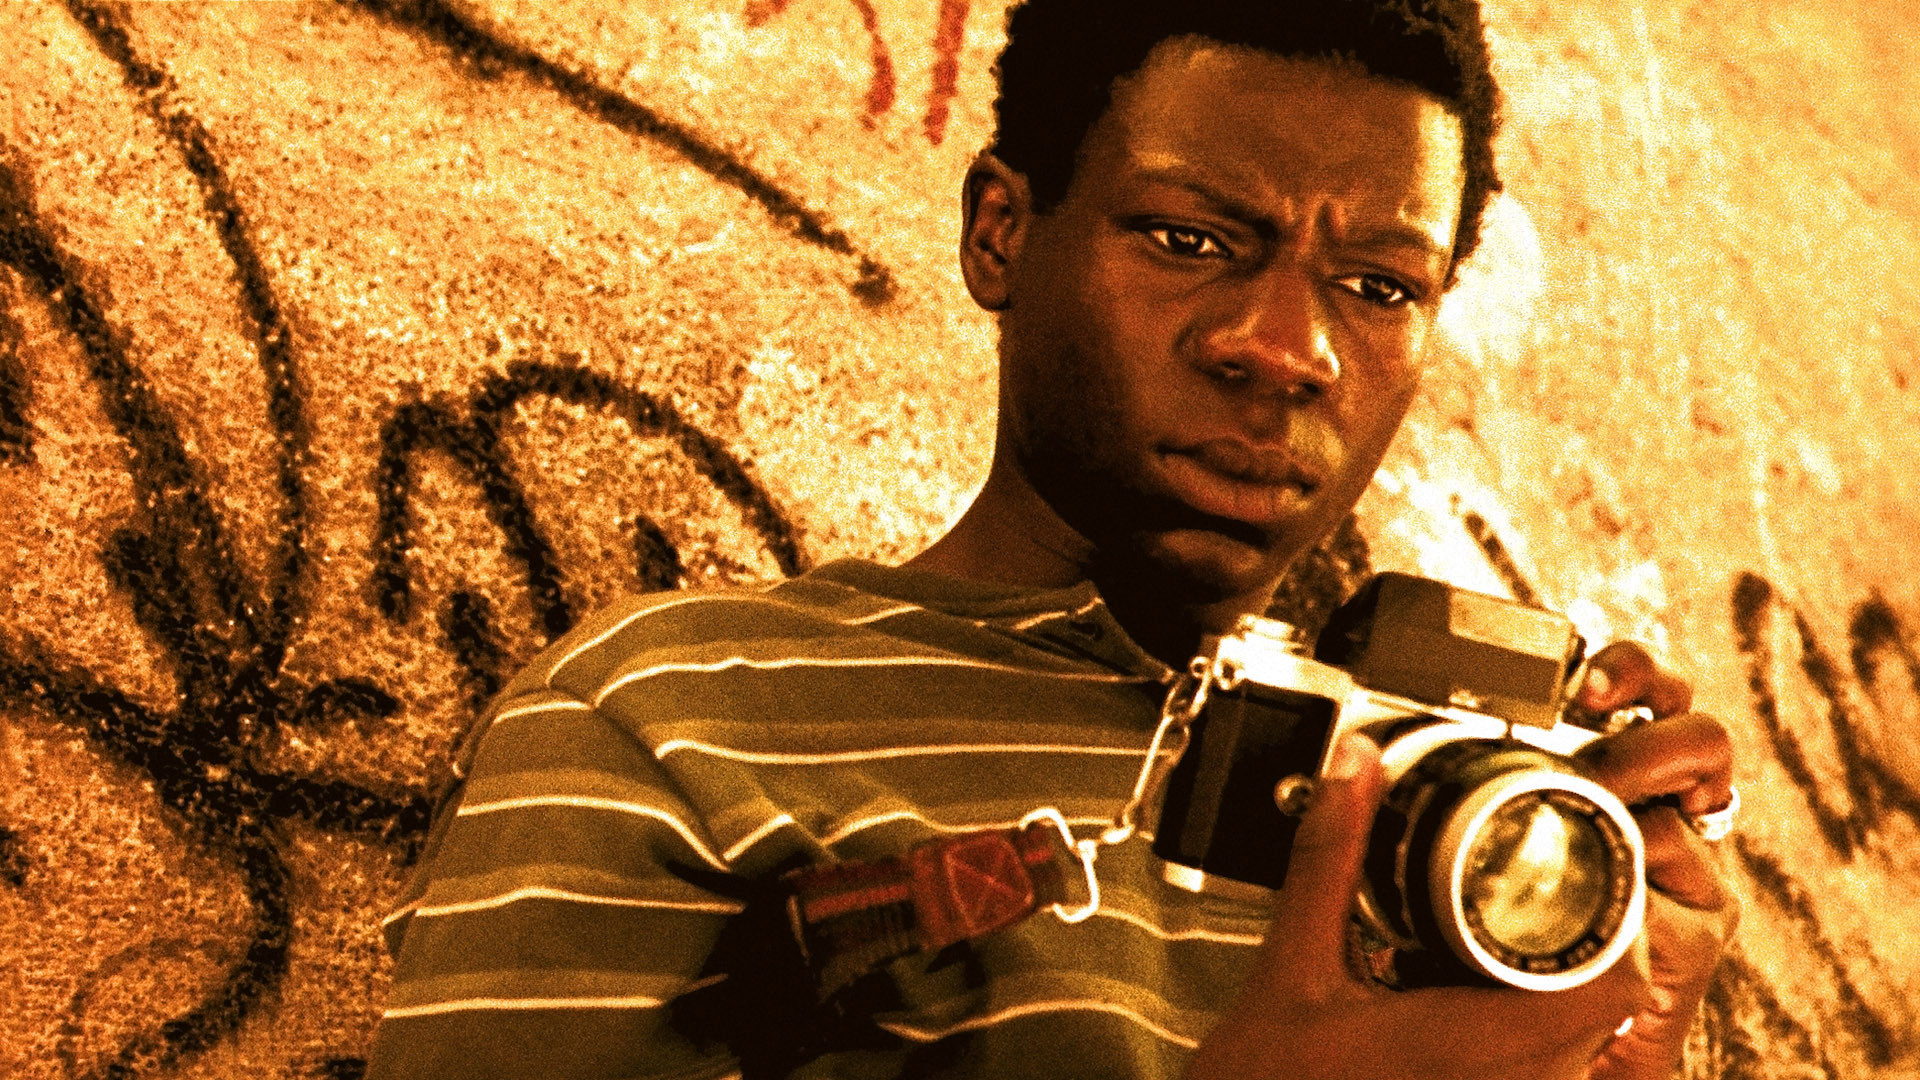 10 City Of God HD Wallpapers | Backgrounds - Wallpaper Abyss